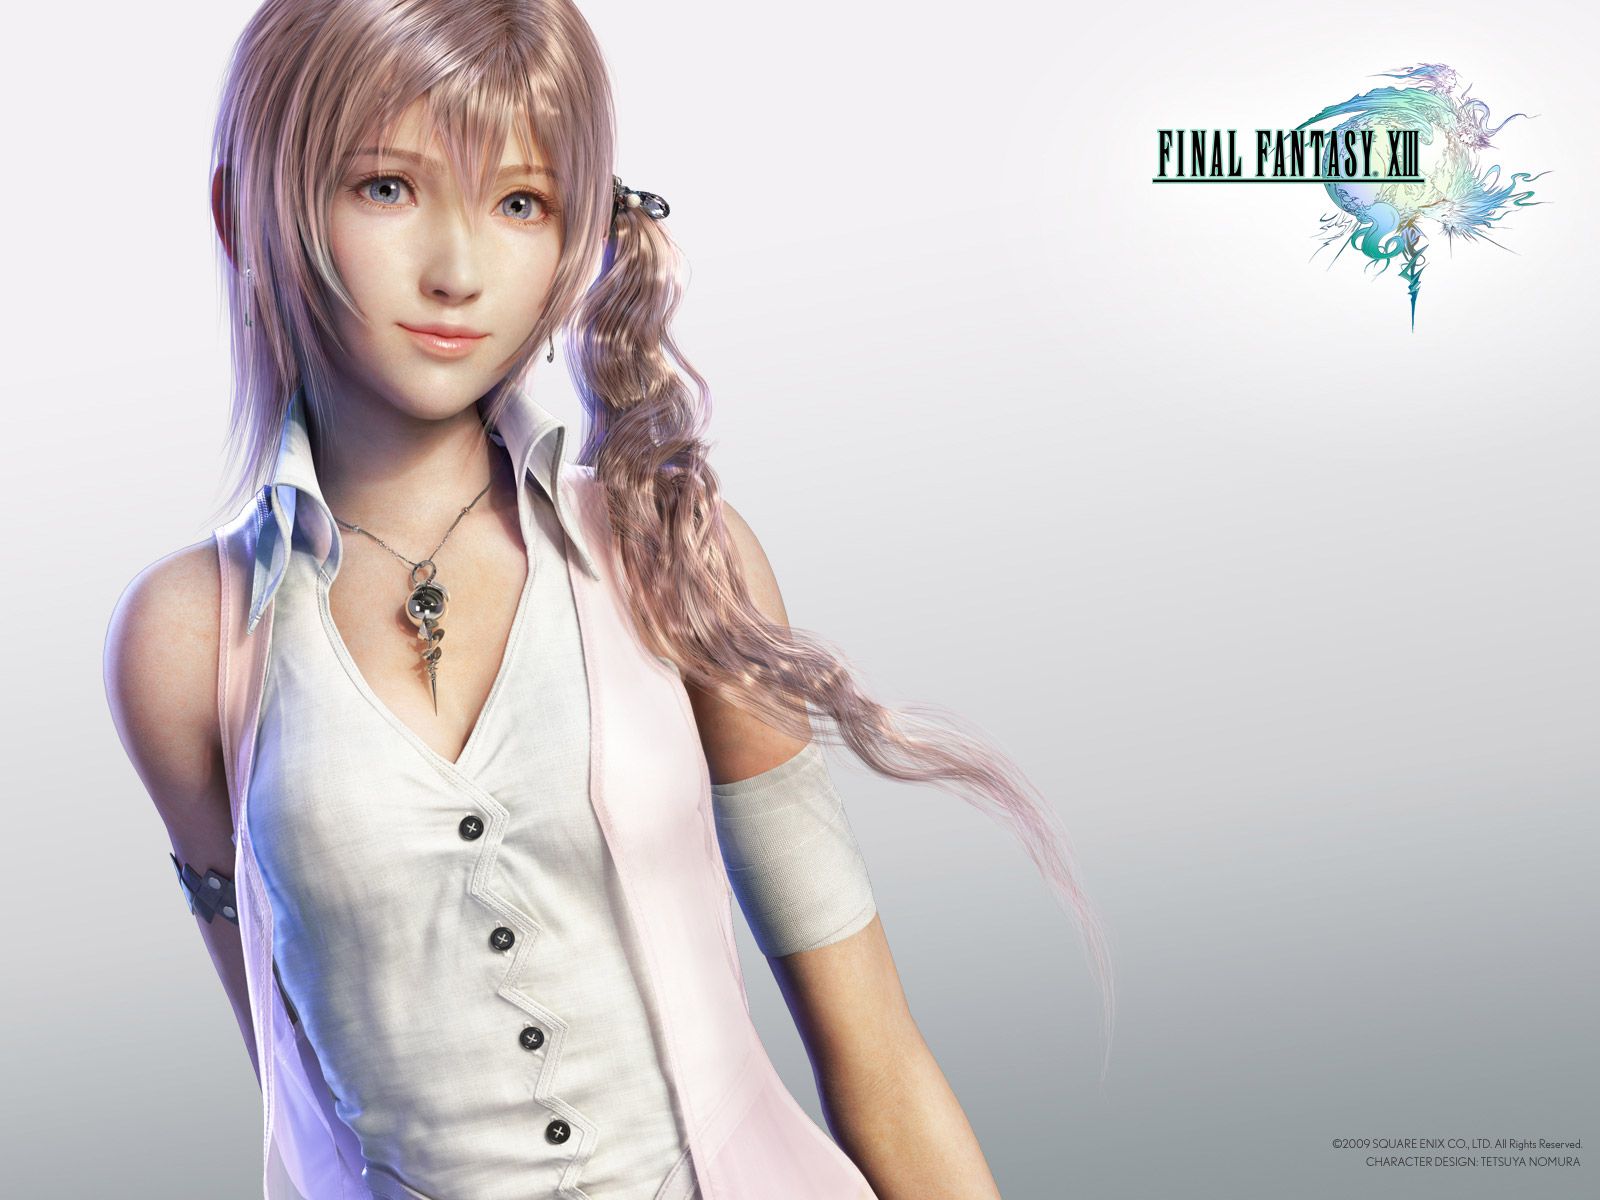 Final Fantasy XIII Game 3 Wallpapers HD Backgrounds